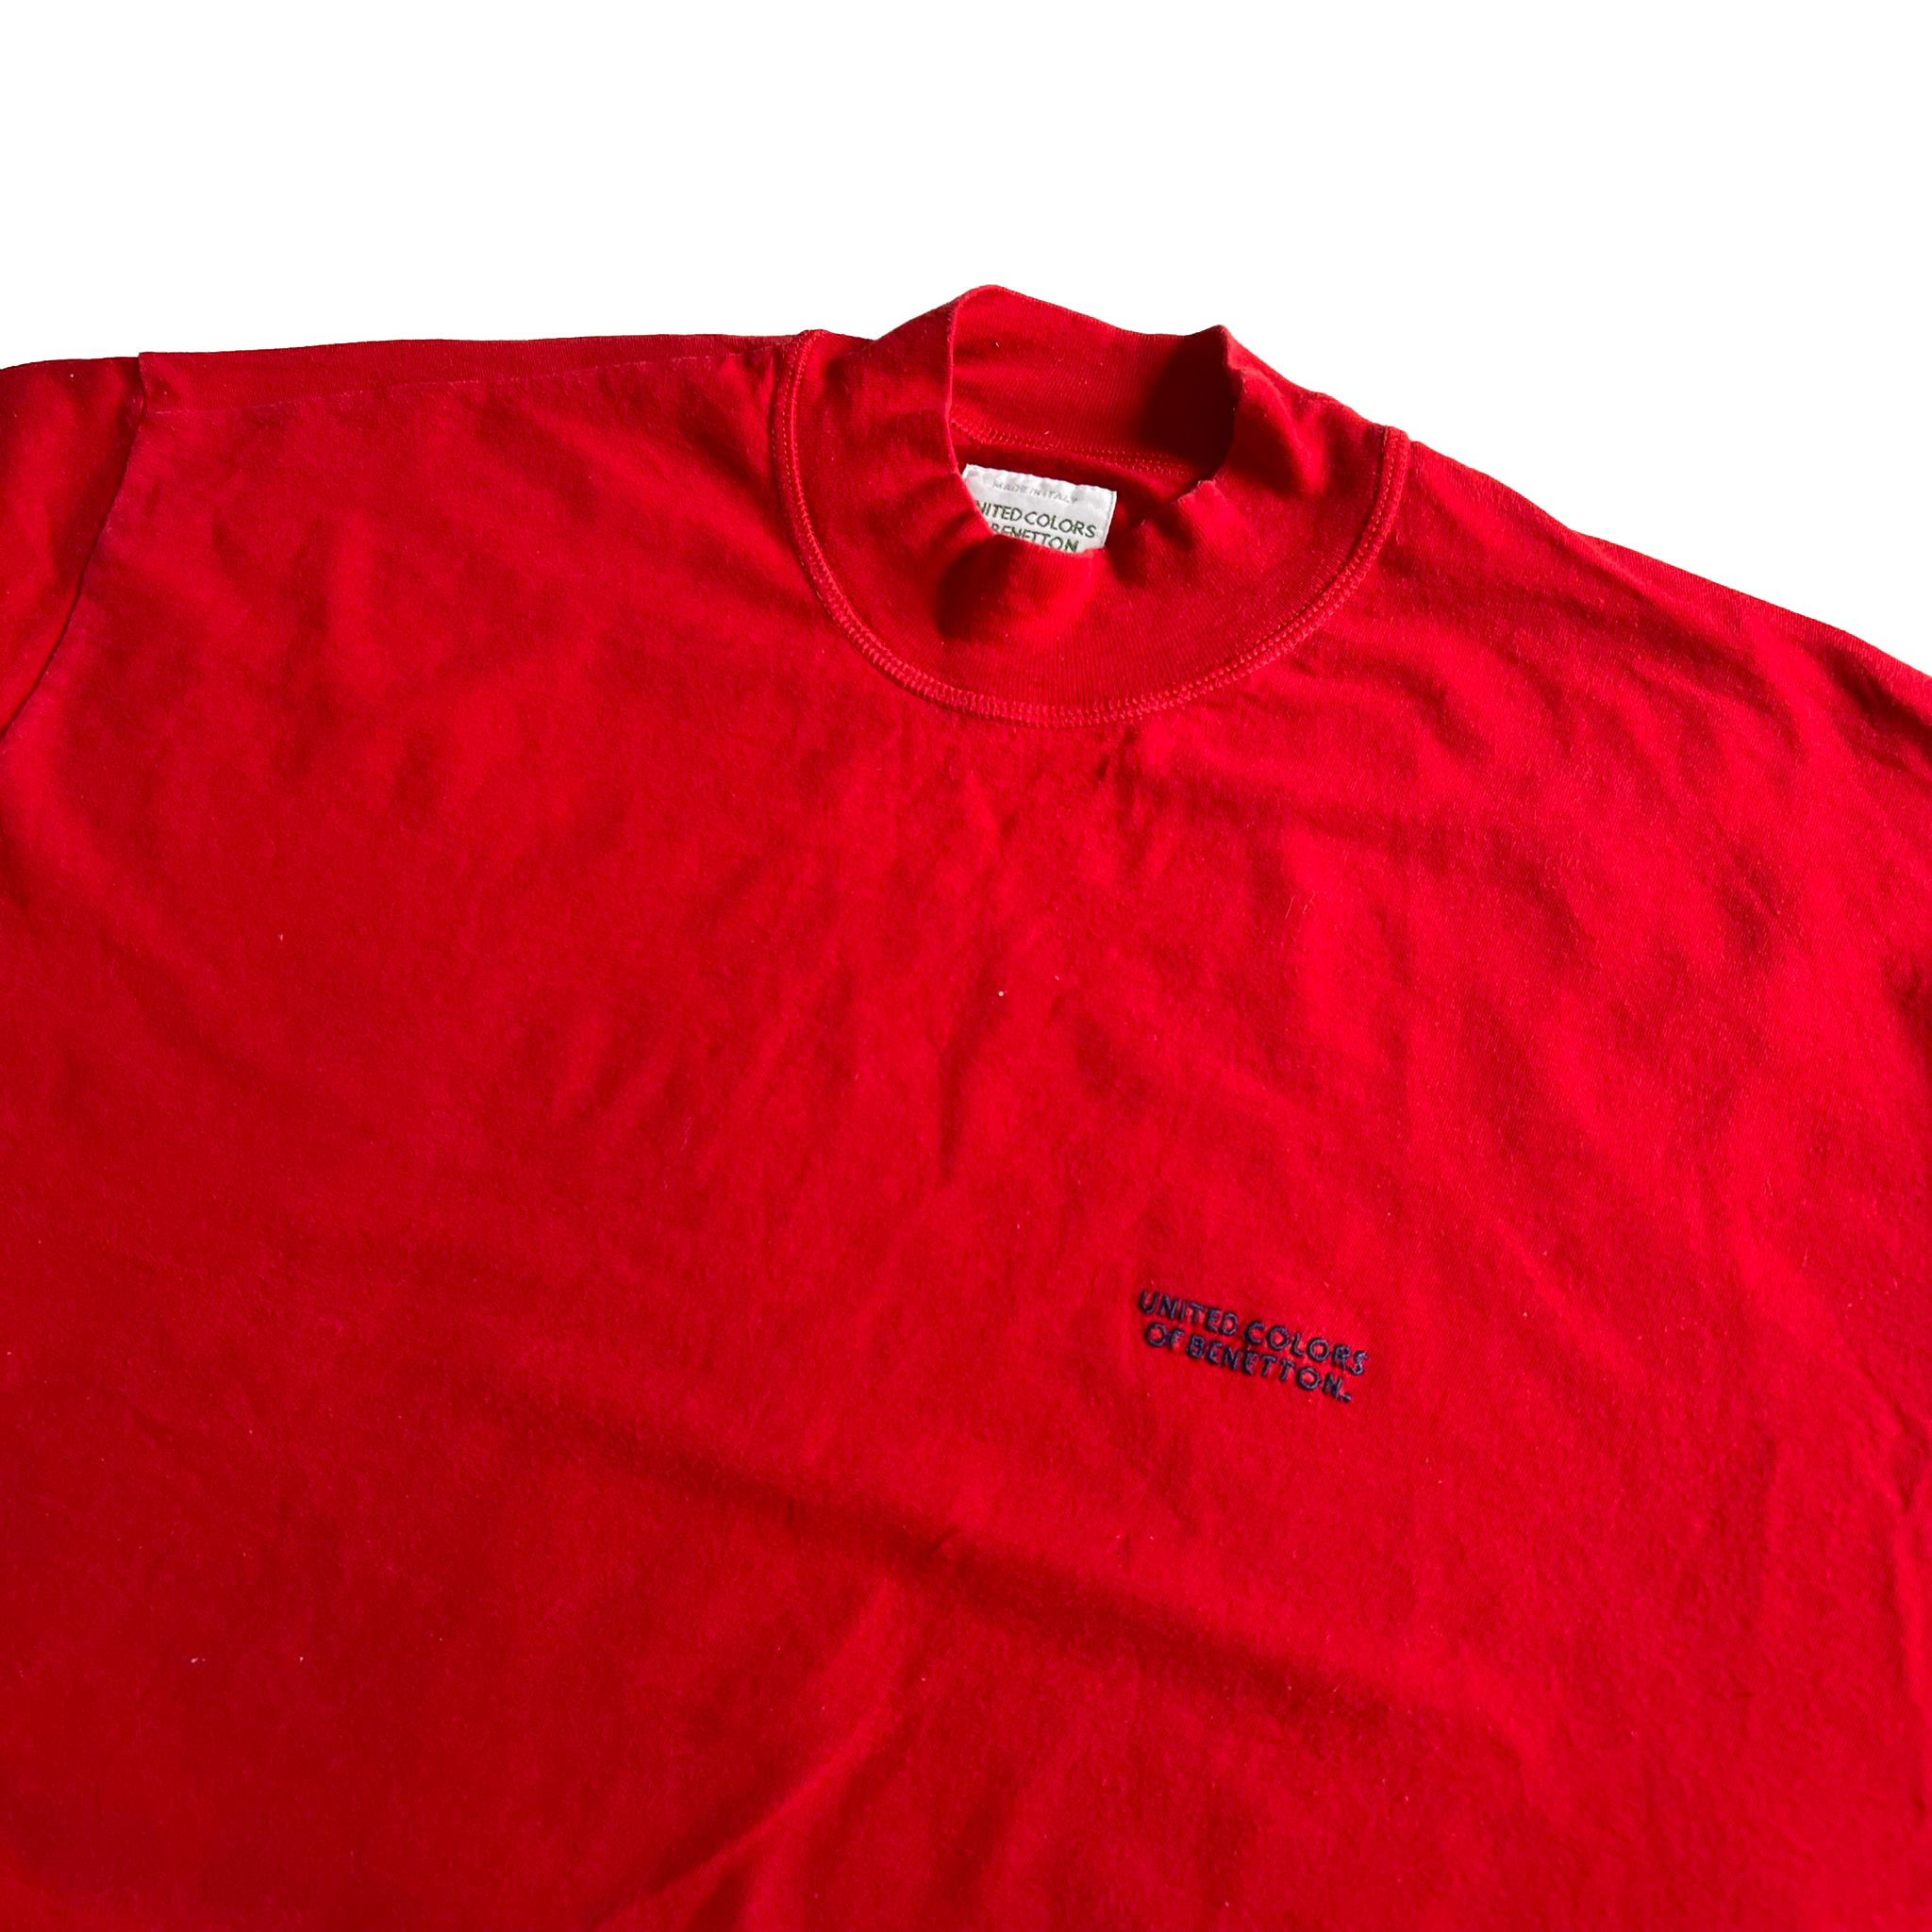 90's United Colours Of Benetton t-shirt